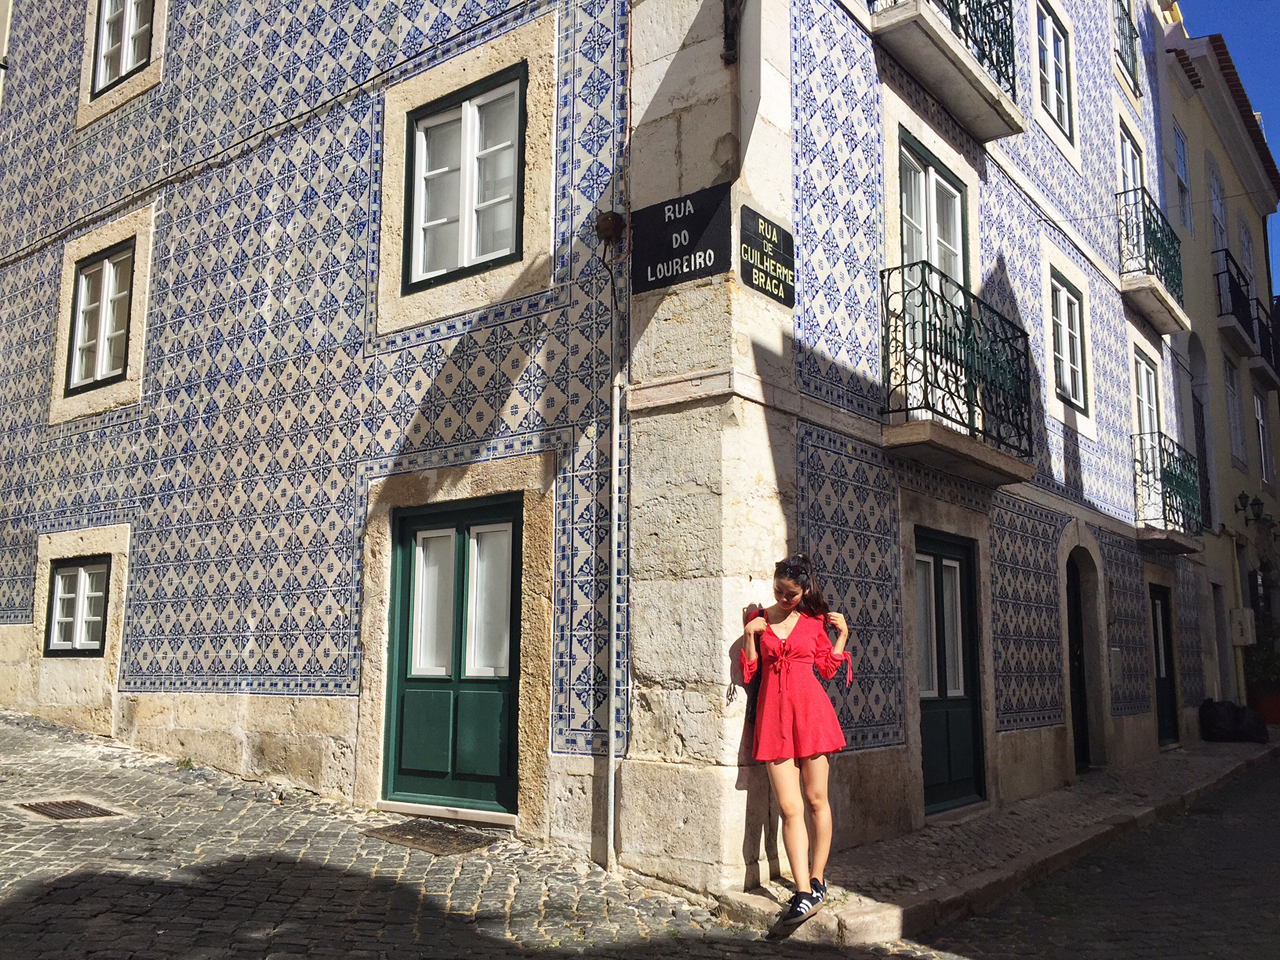 Holiday style in Lisbon